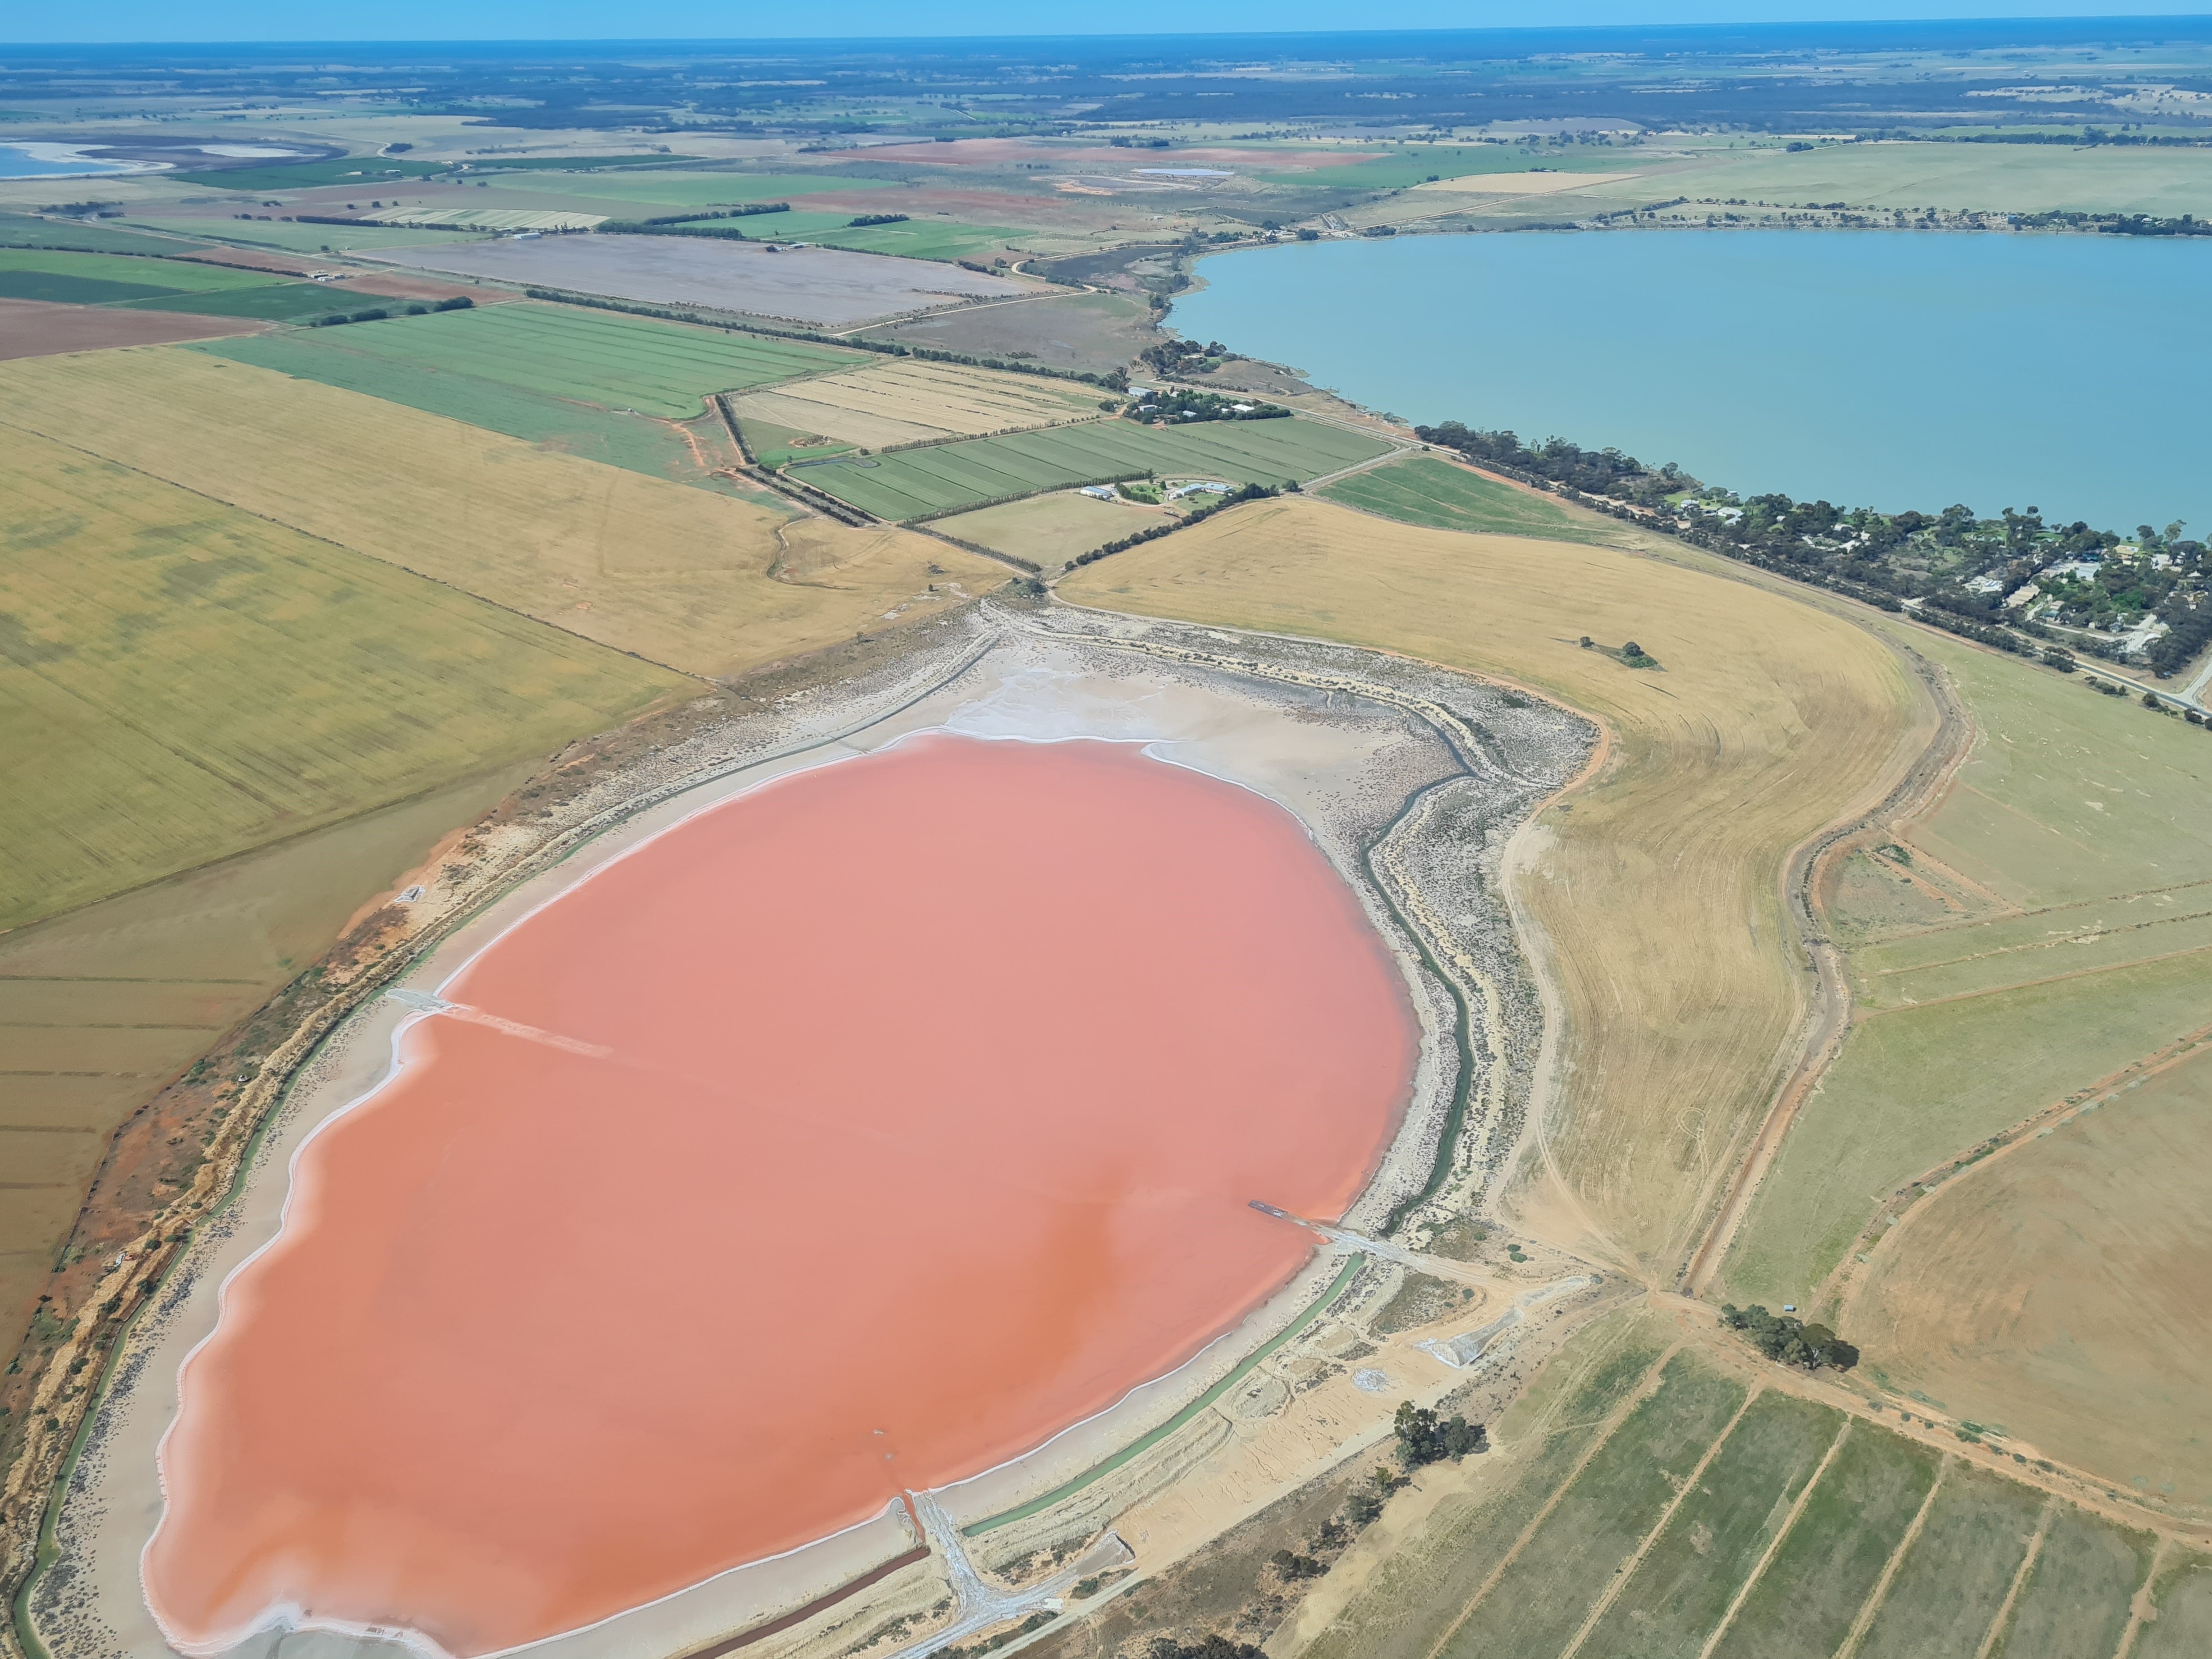 One of the dry salt lakes (pink) with the freshwater Kerang Lake in the background.